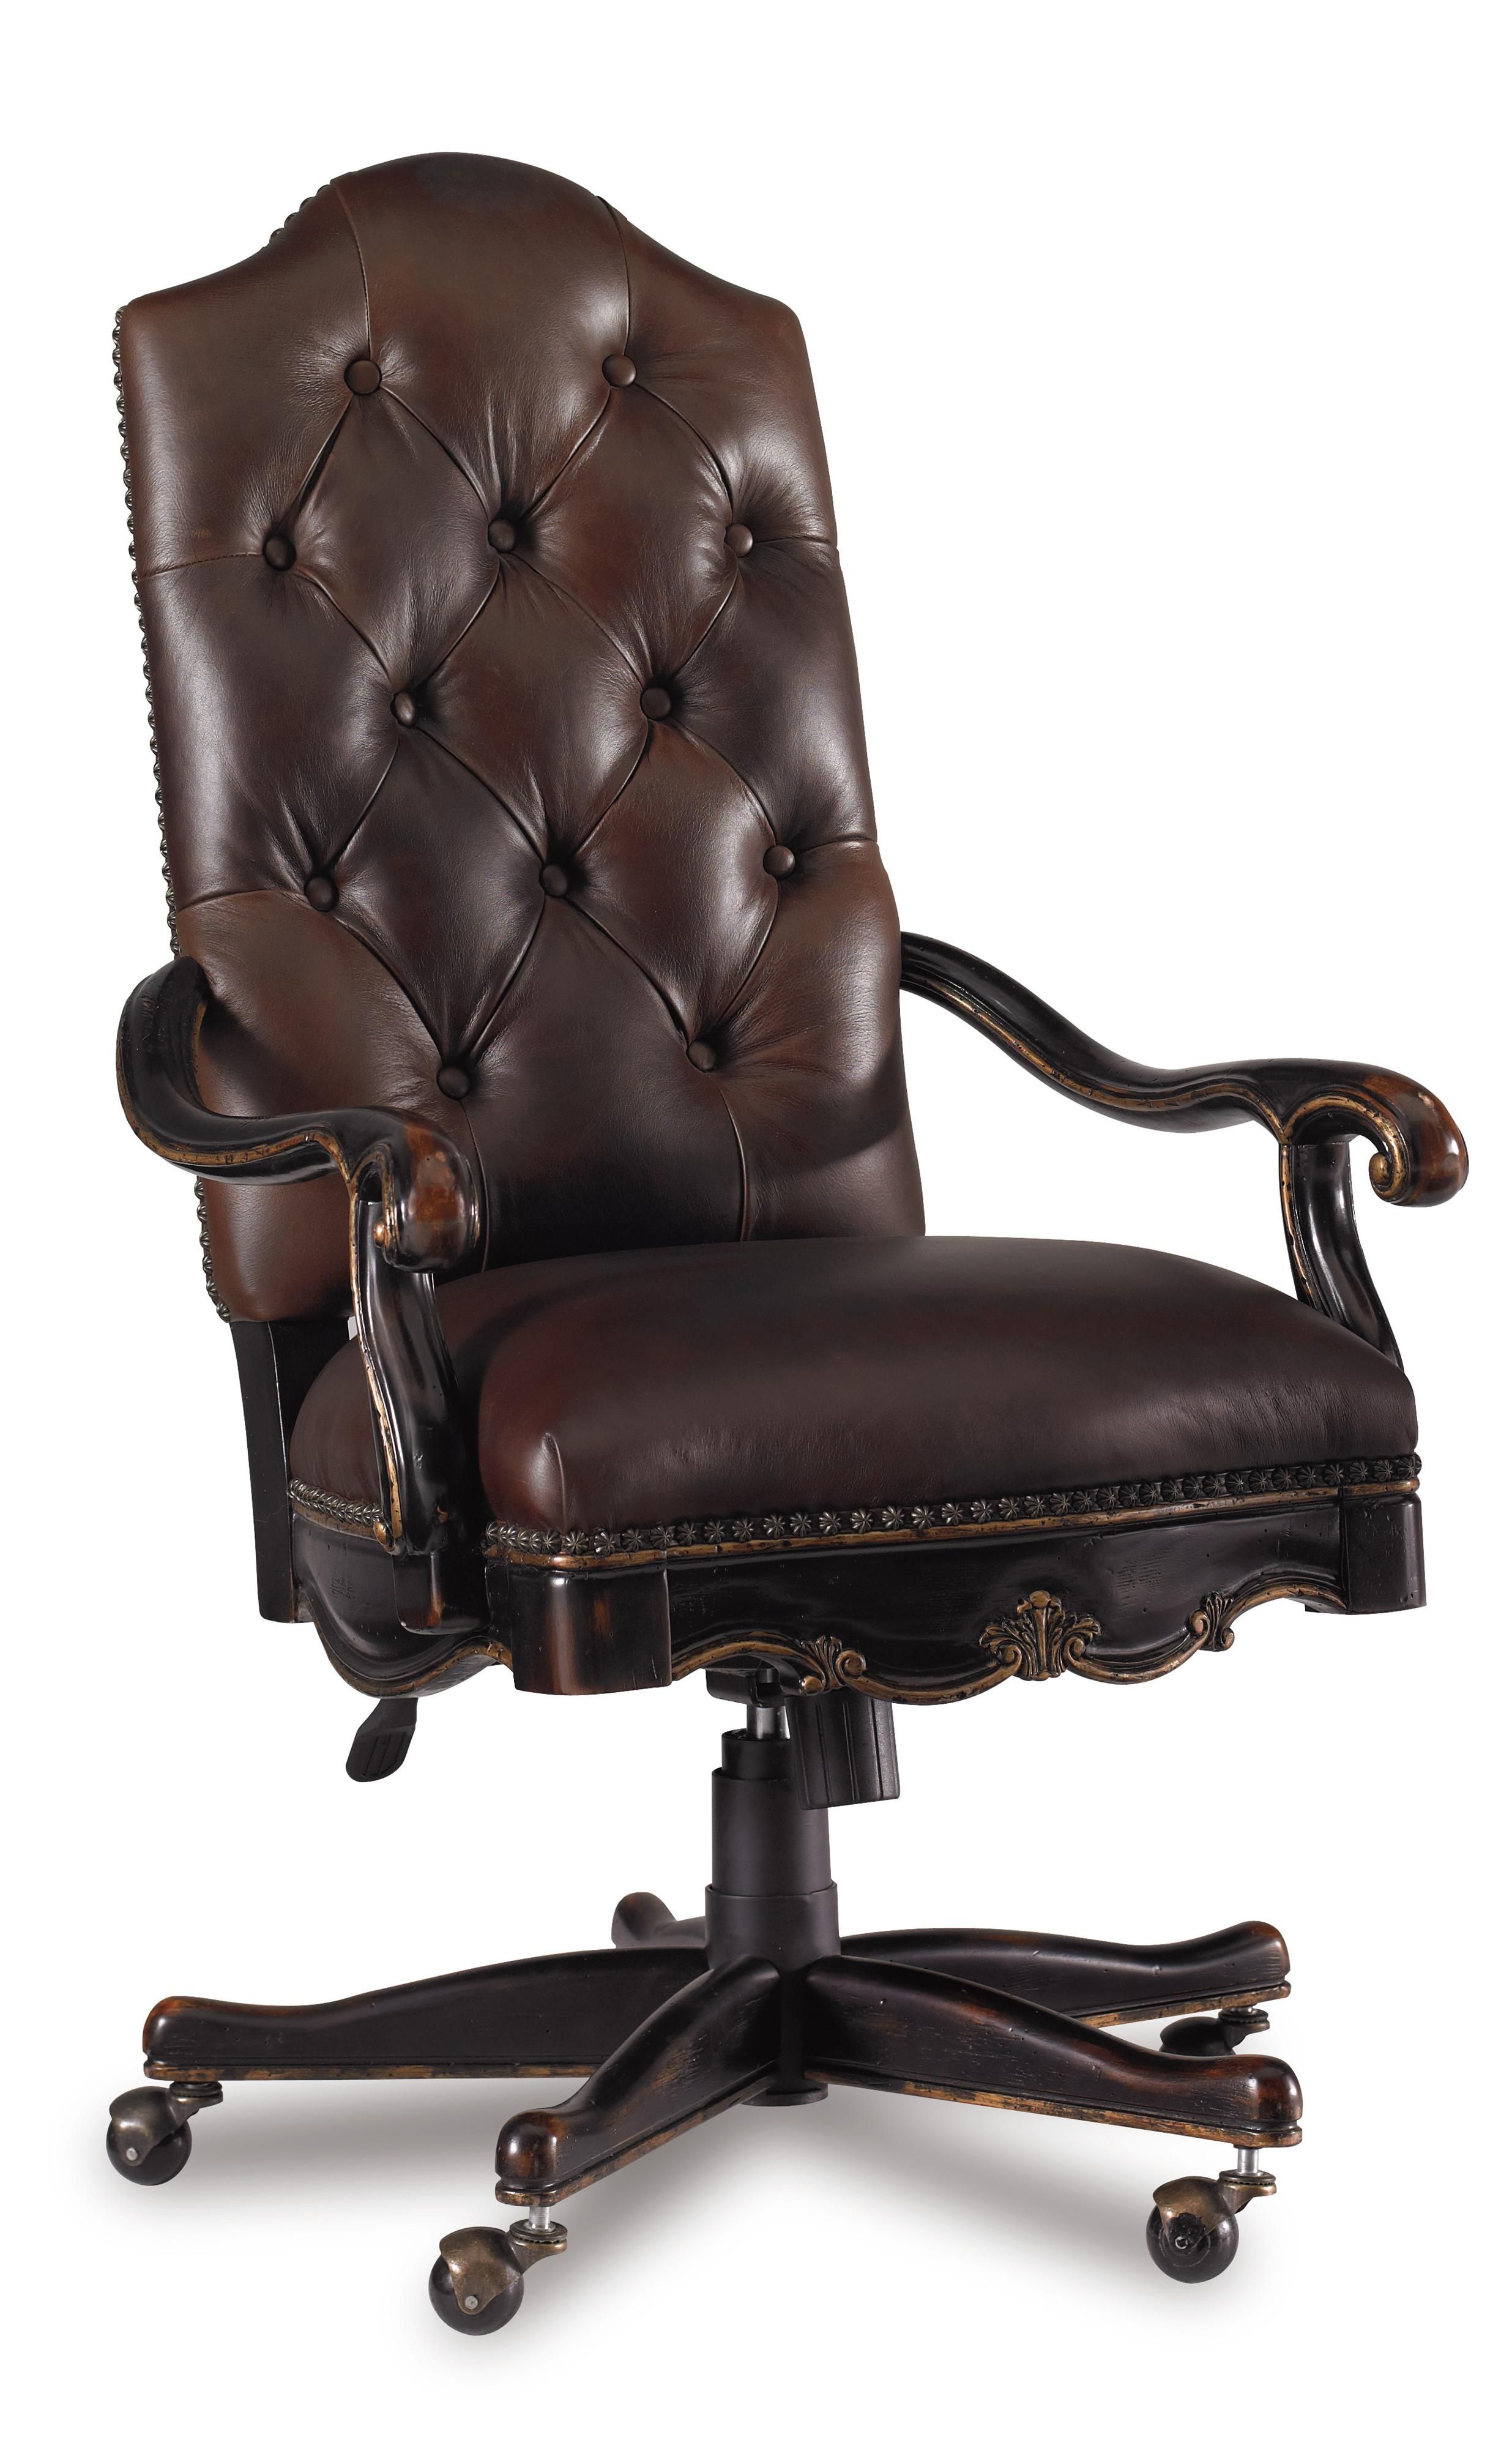 Hooker Furniture Grandover Tufted Leather Executive Office Chair For Chocolate Brown Leather Tufted Swivel Chairs (View 14 of 25)